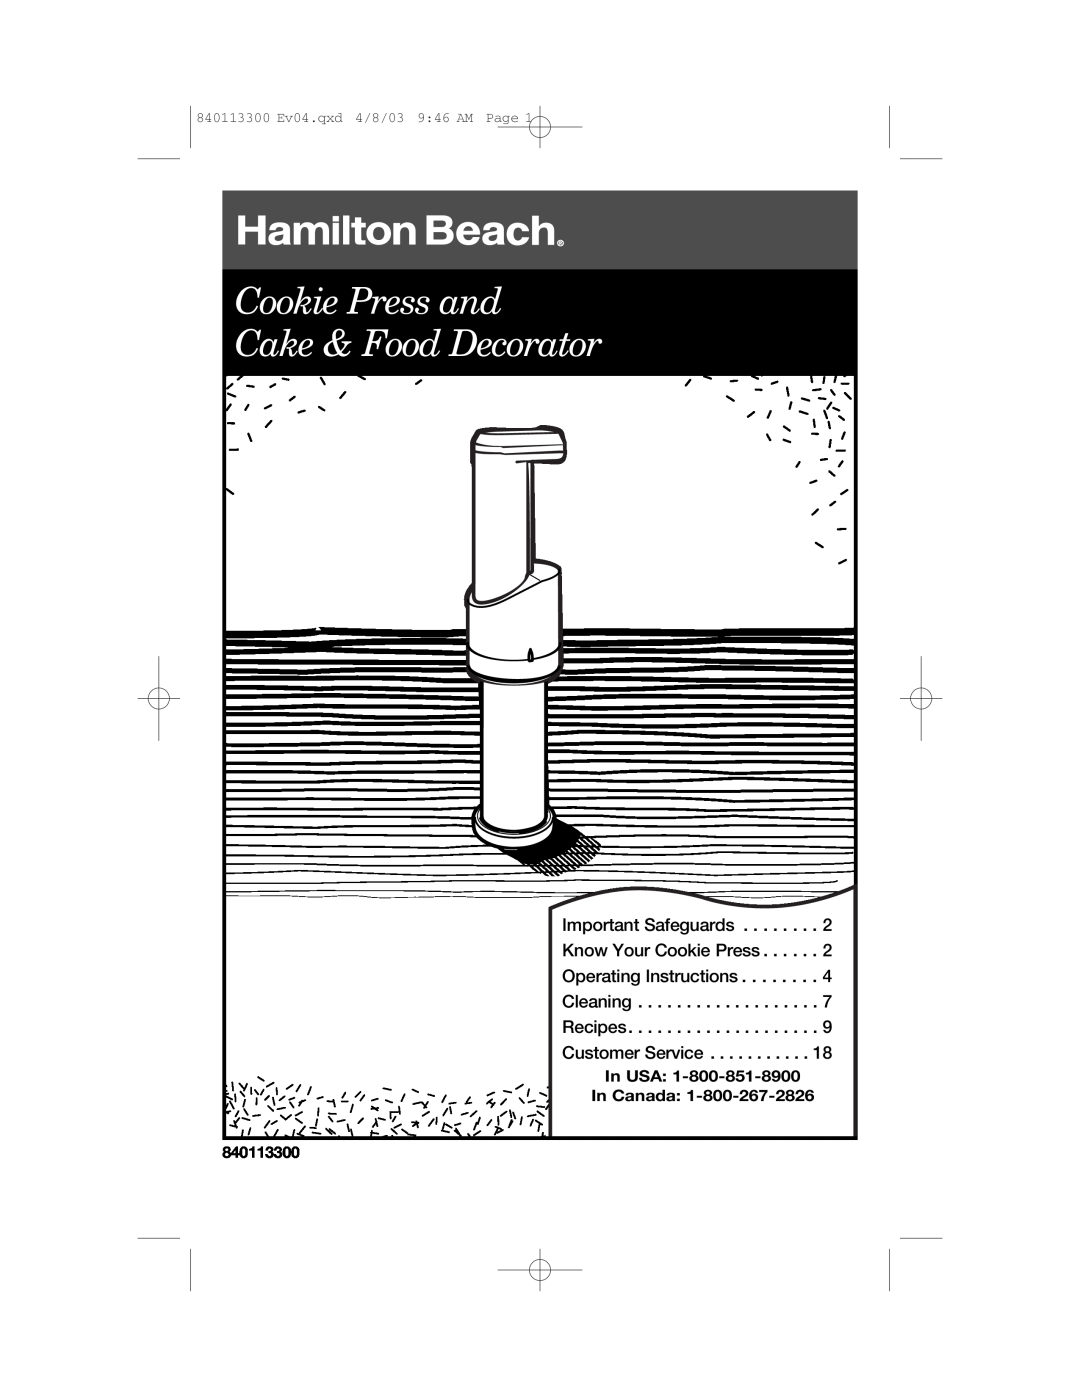 Hamilton Beach 840113300 operating instructions Important Safeguards, Know Your Cookie Press, Operating Instructions 